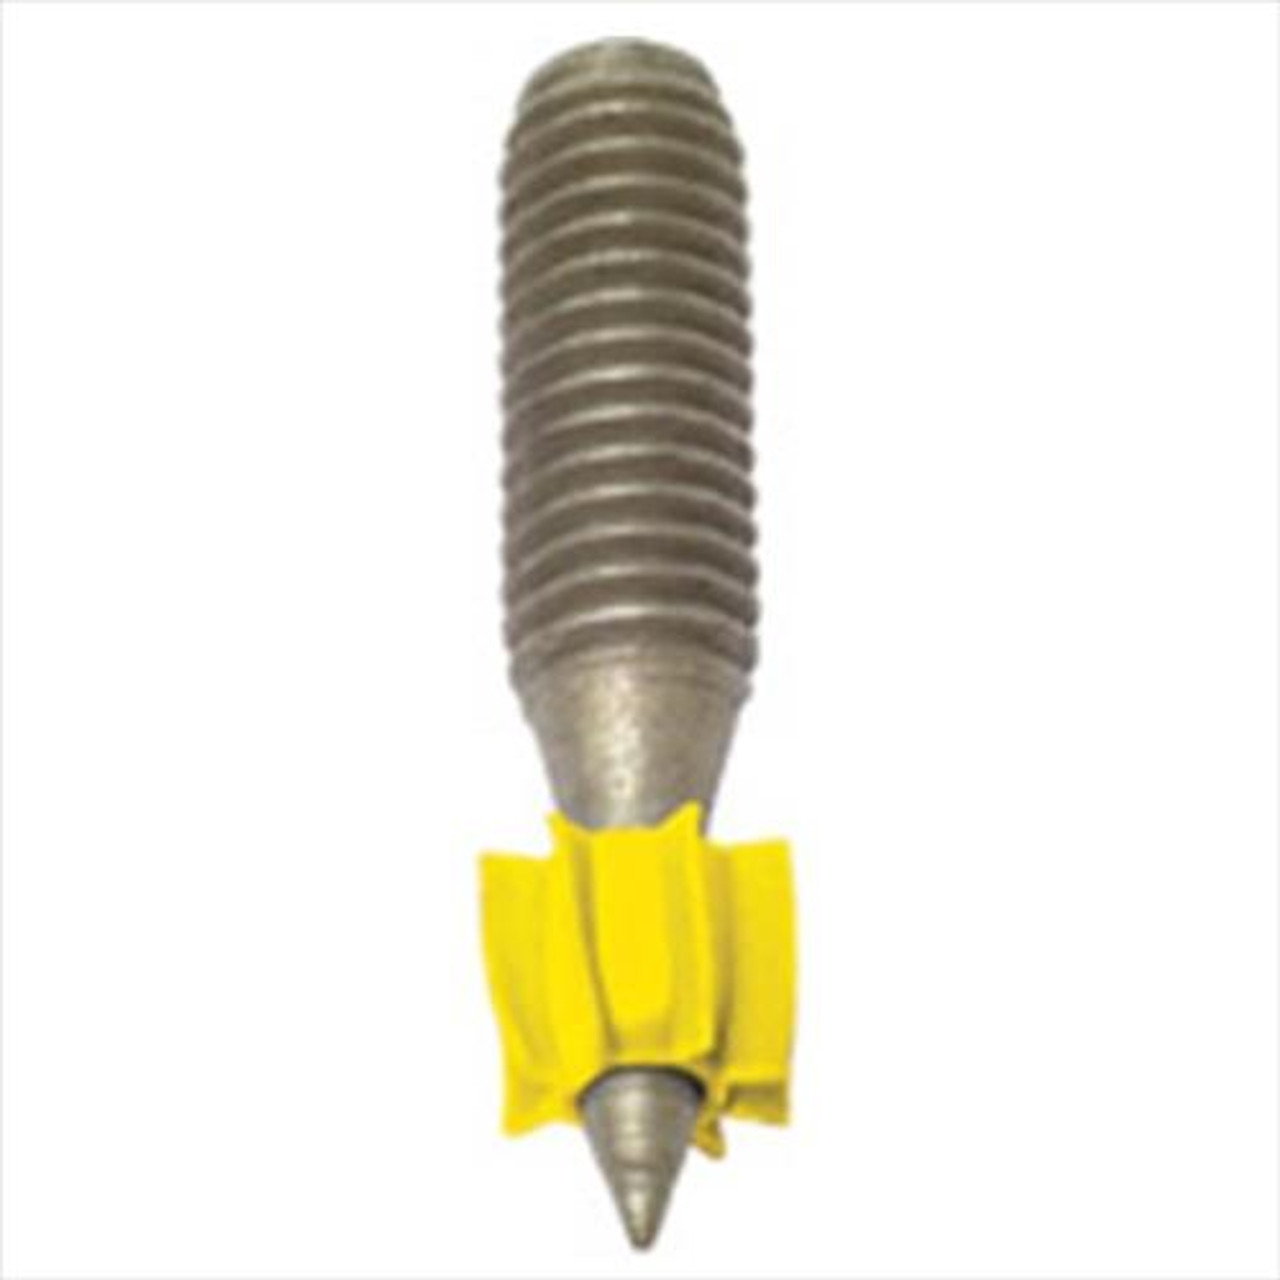 Simpson Strong-Tie PSLV3-125100 3/8-16 LV Stud Thread 1-1/4-Inch Shank 1-Inch 1M